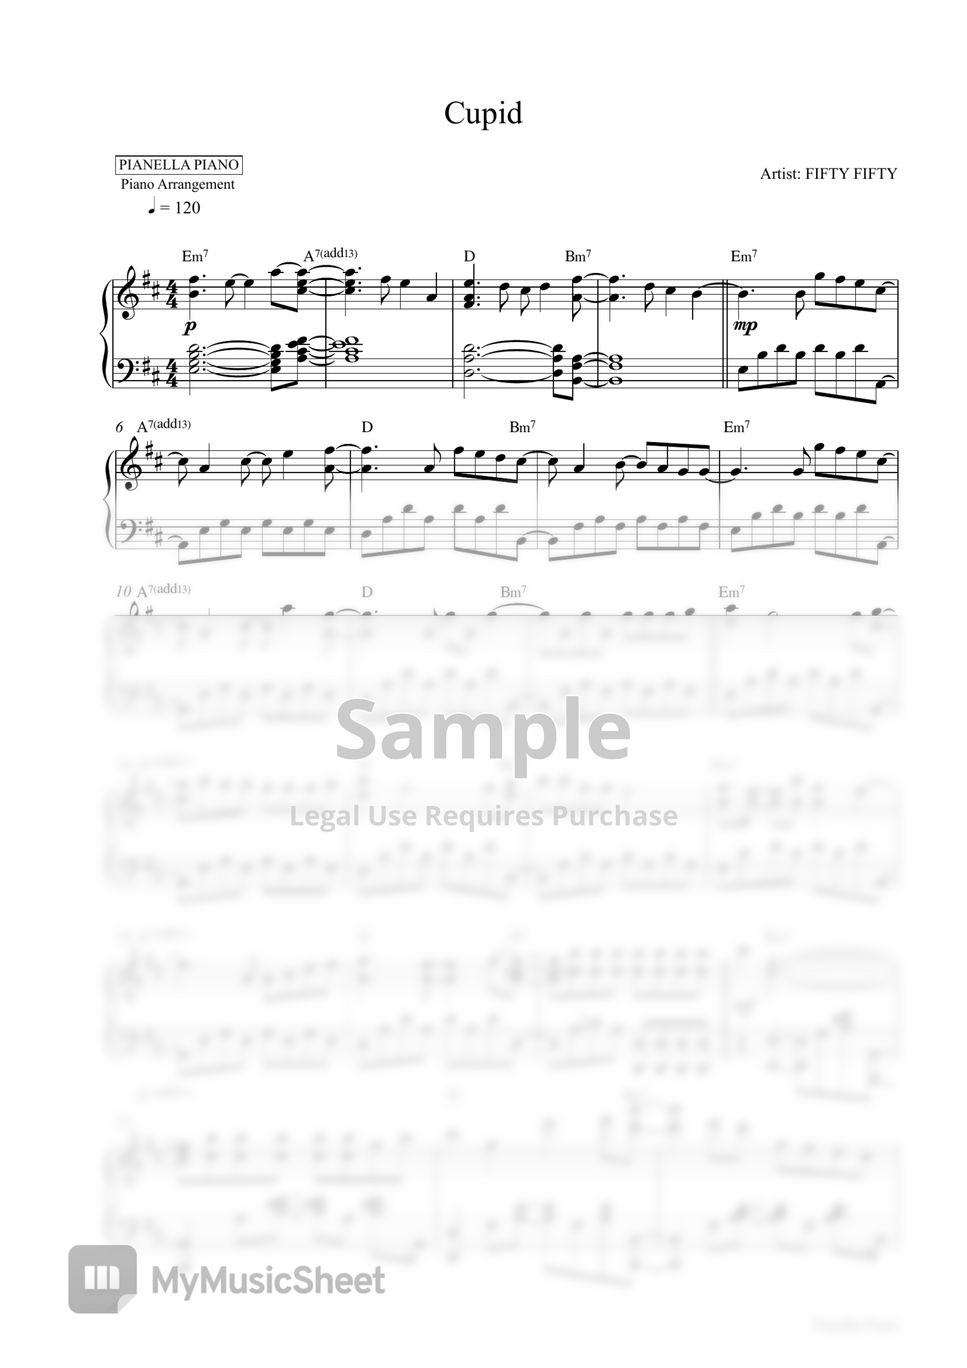 FIFTY FIFTY - Cupid (Piano Sheet) by Pianella Piano